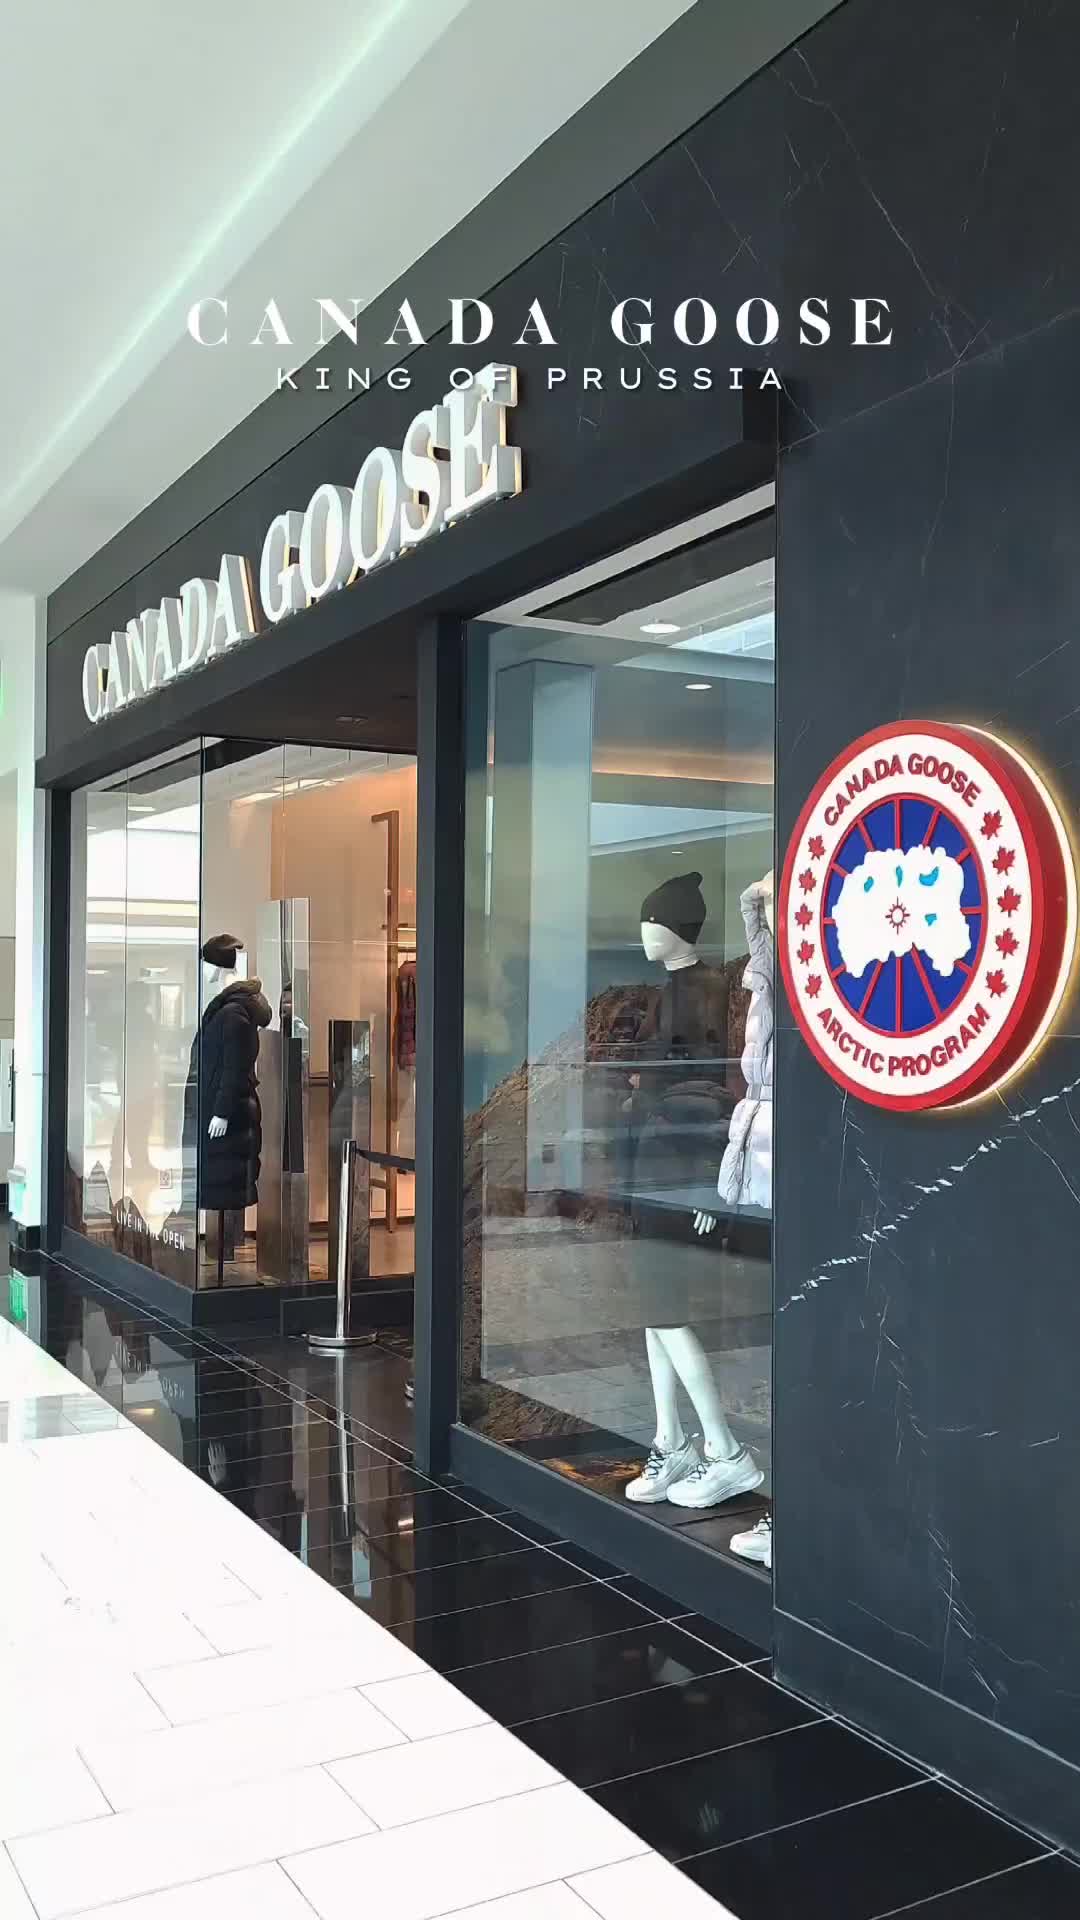 @canadagoose at @kop_mall is a vibe! (found my favorite fit at the end) This newly open store is modern and chic ✨️ with so many new styles  that will keep you fashionably warm this winter. With their knowledgable and attentive staff, you sure will have a good time finding your best looks for this winter!

Comment "Goose" for direct links 

Don't forget to stop by @canadagoose KOP and check them out this season! ❄️